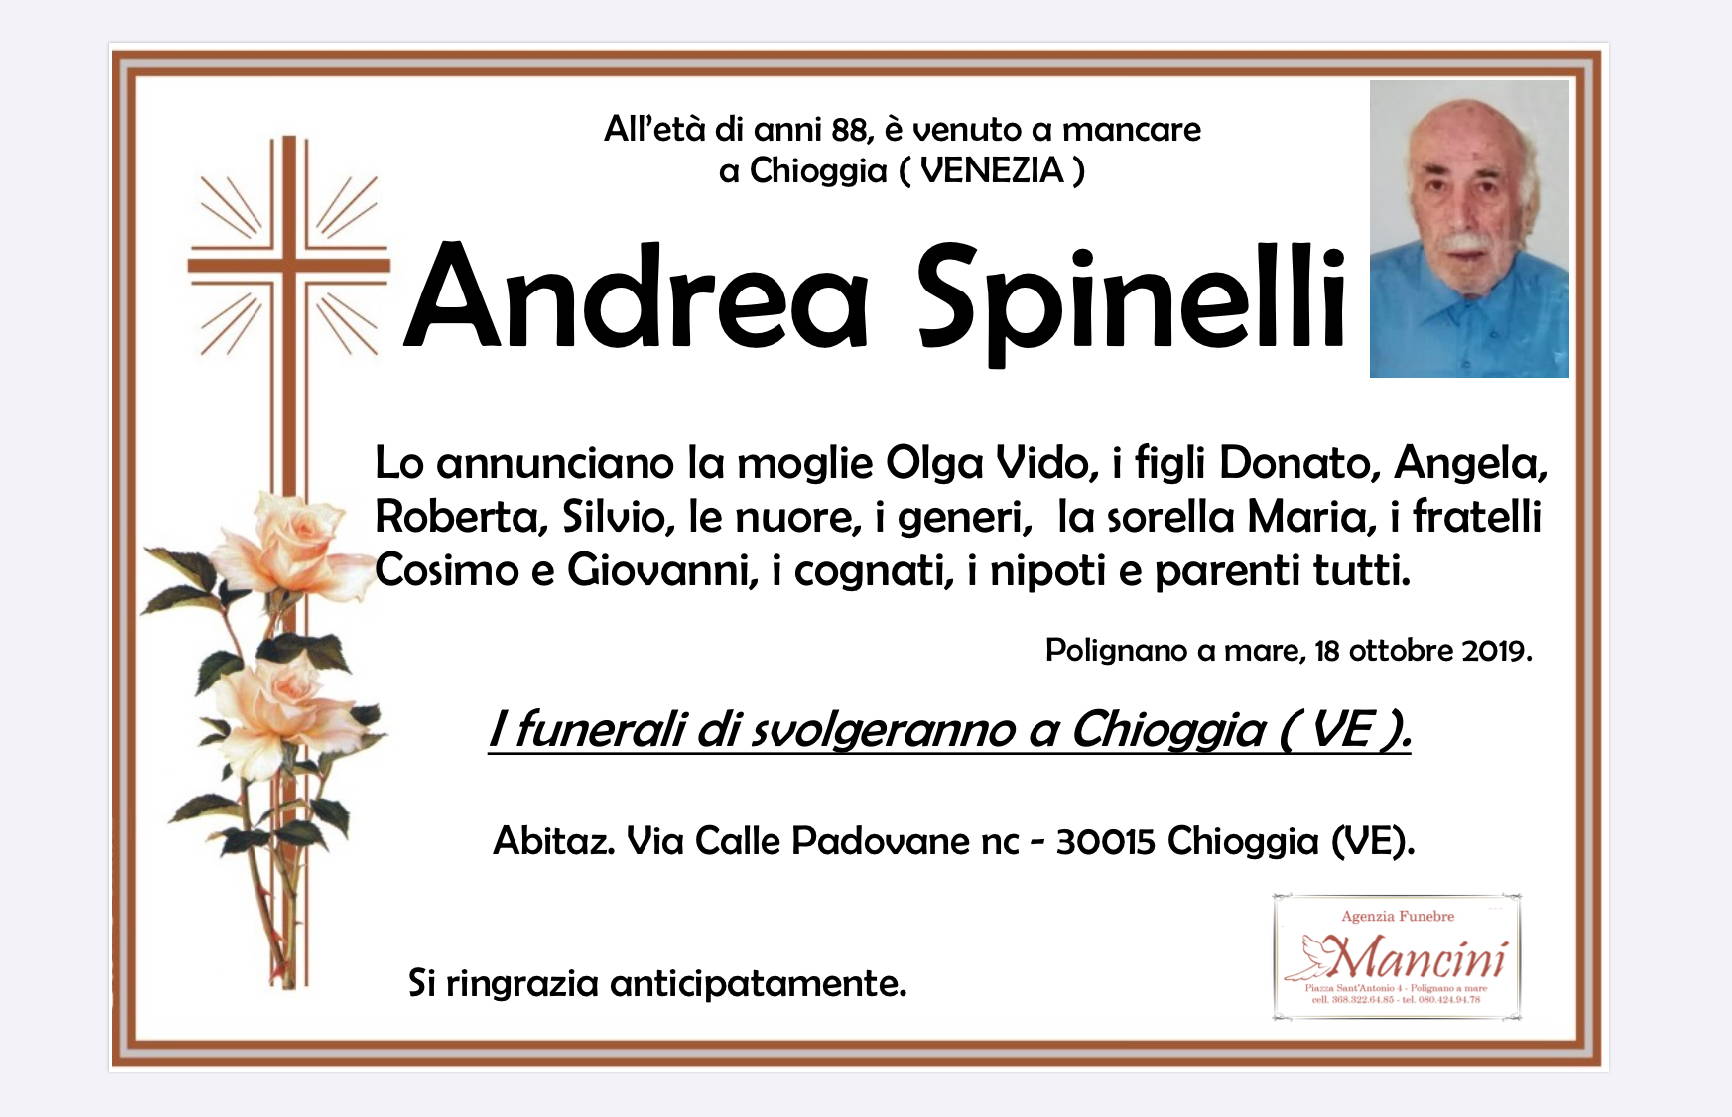 Andrea Spinelli